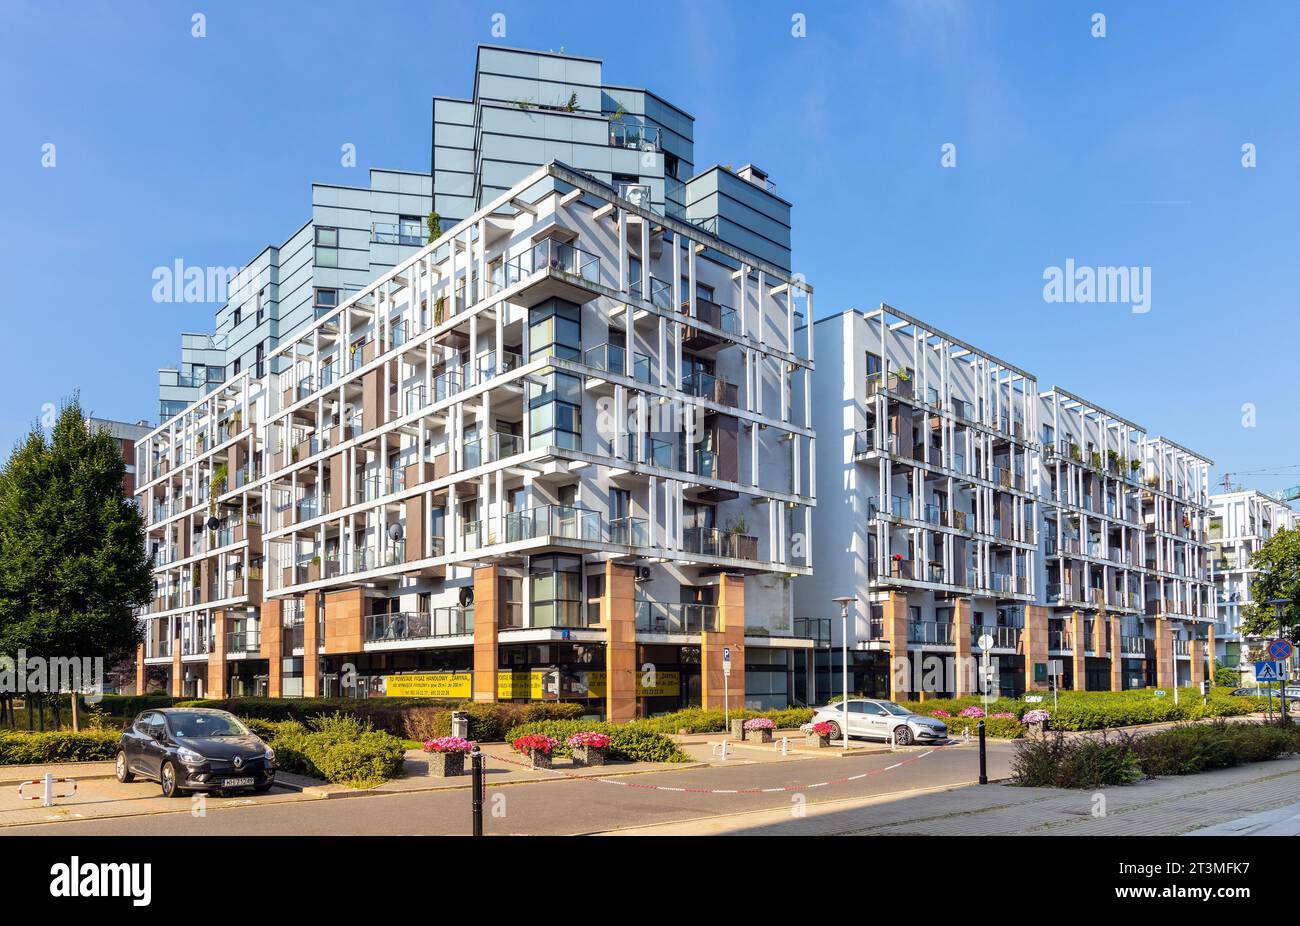 Warsaw, Poland - July 25, 2021: Modern residential apartment buildings at Zaryna street in Mokotow residential district of Warsaw Stock Photo